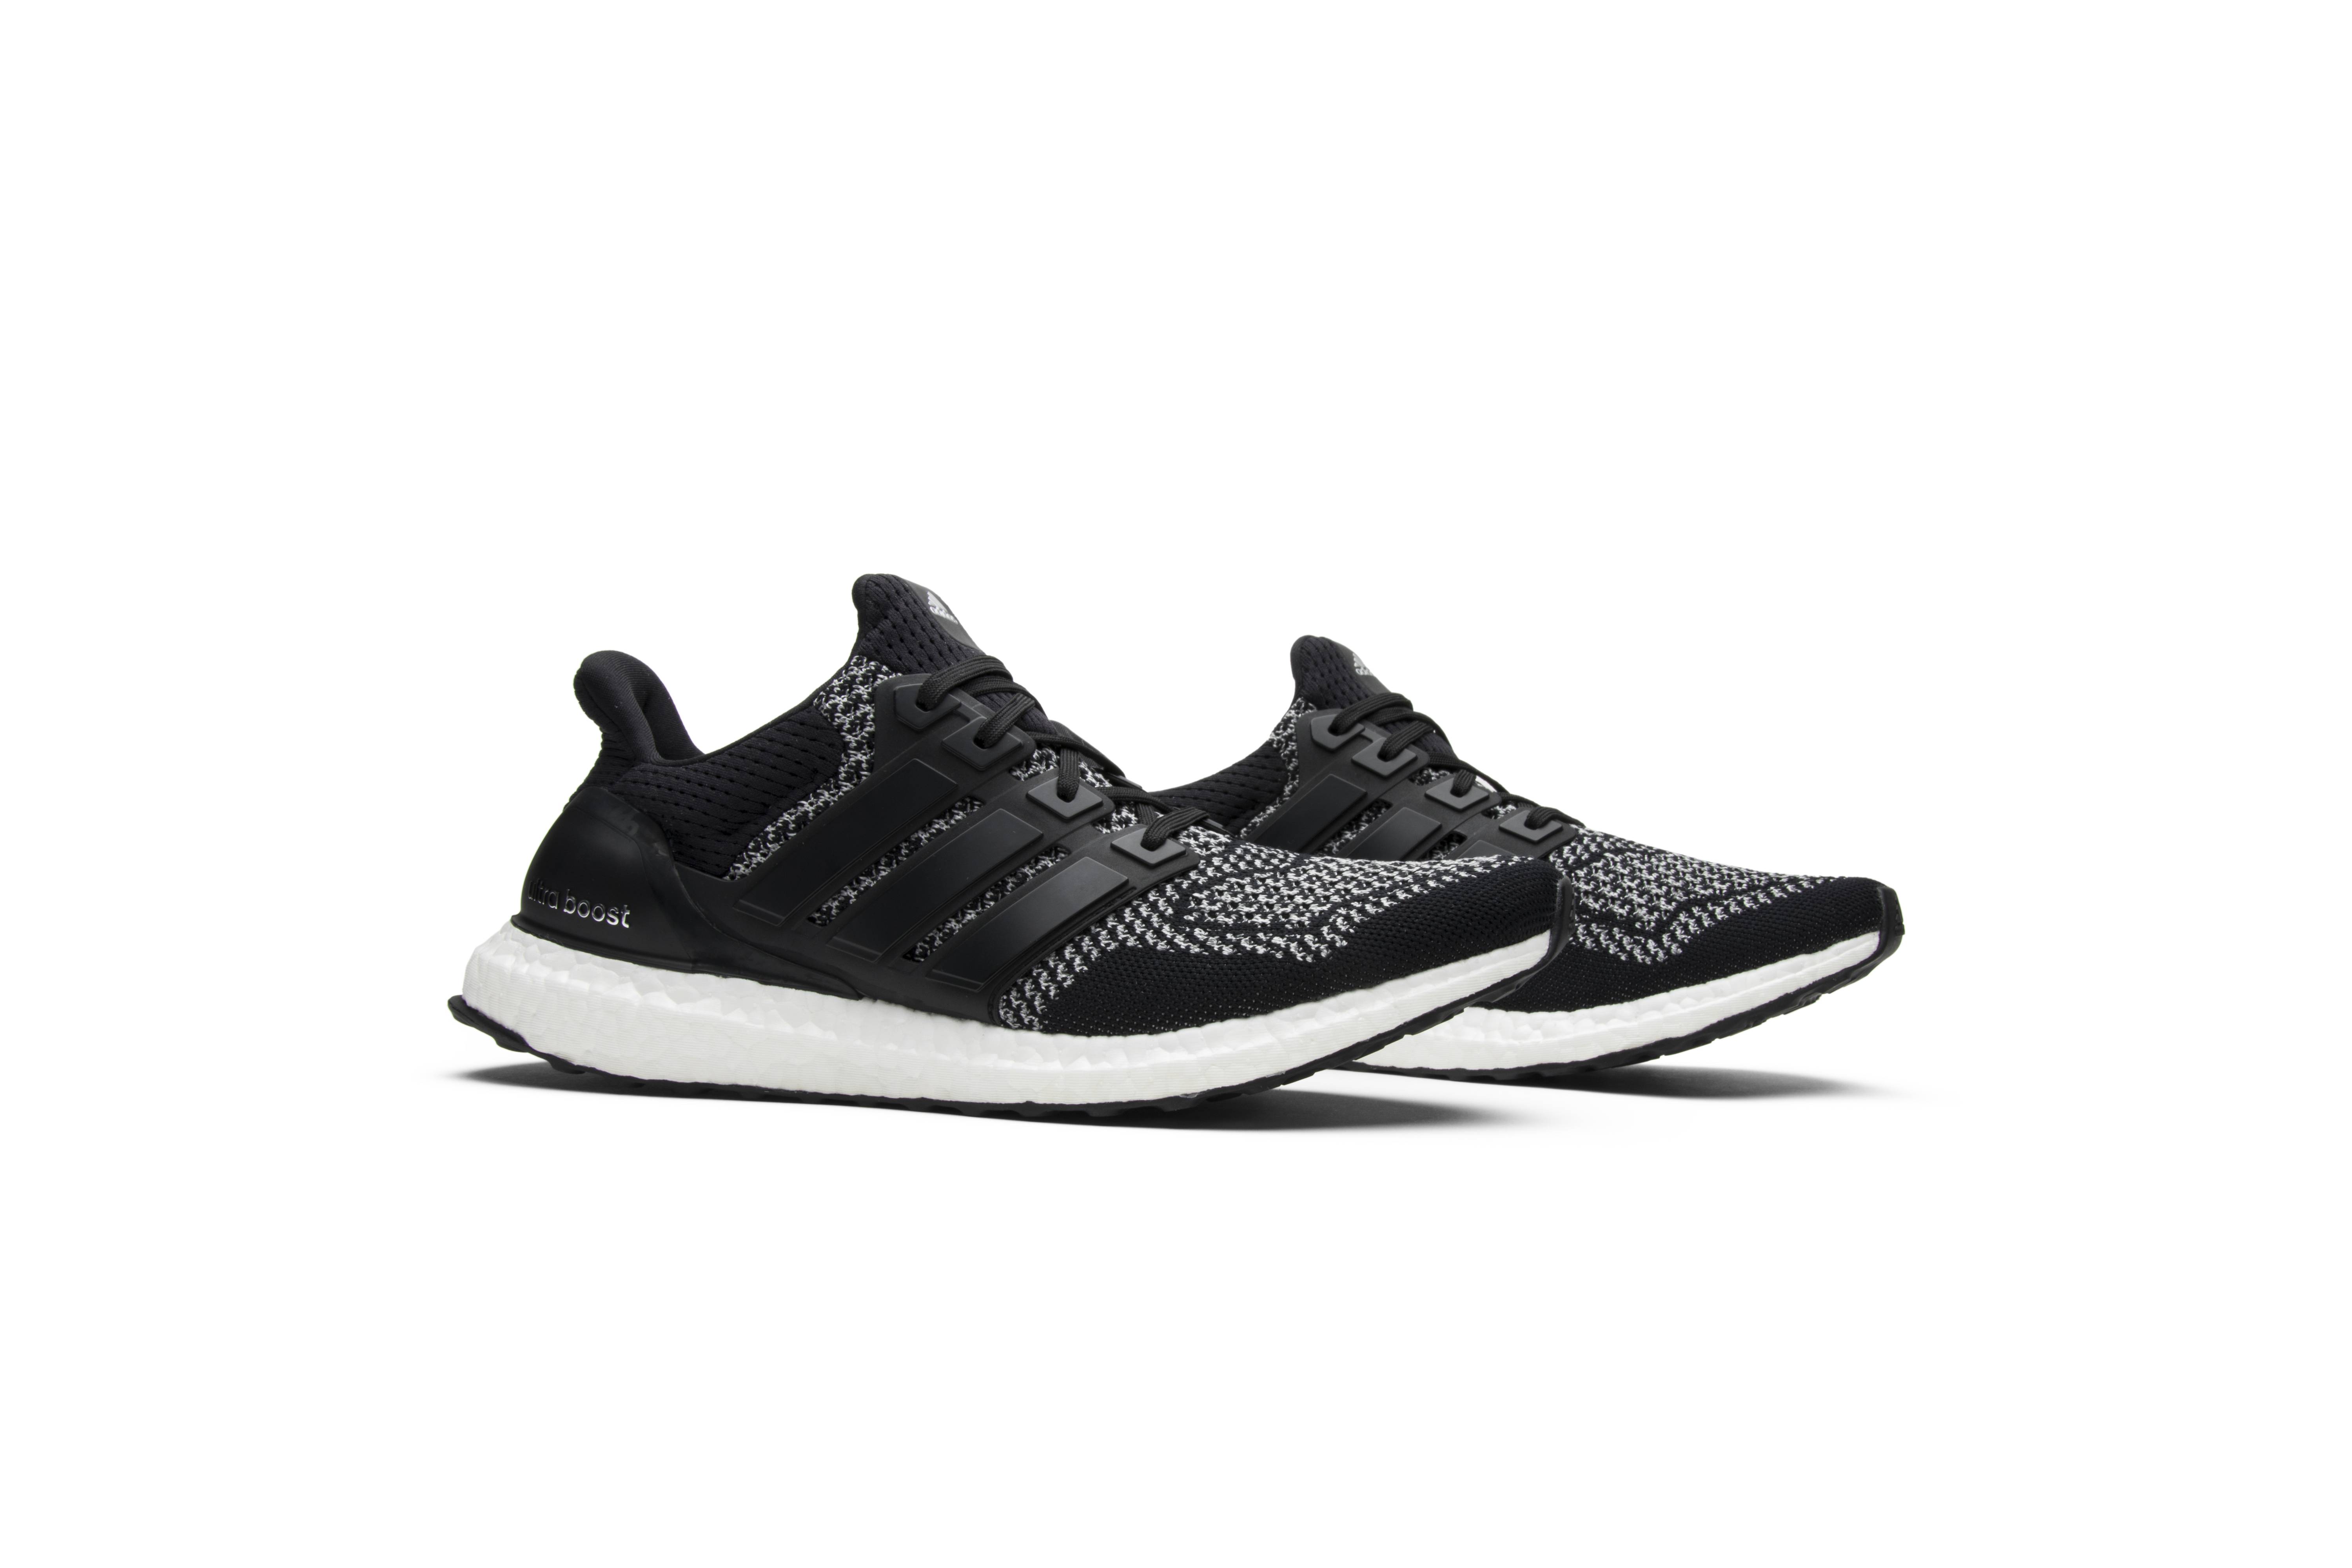 Adidas Ultra Boost 1 0 Reflectivelimited Special Sales And Special Offers Women S Men S Sneakers Sports Shoes Shop Athletic Shoes Online Off 55 Free Shipping Fast Shippment